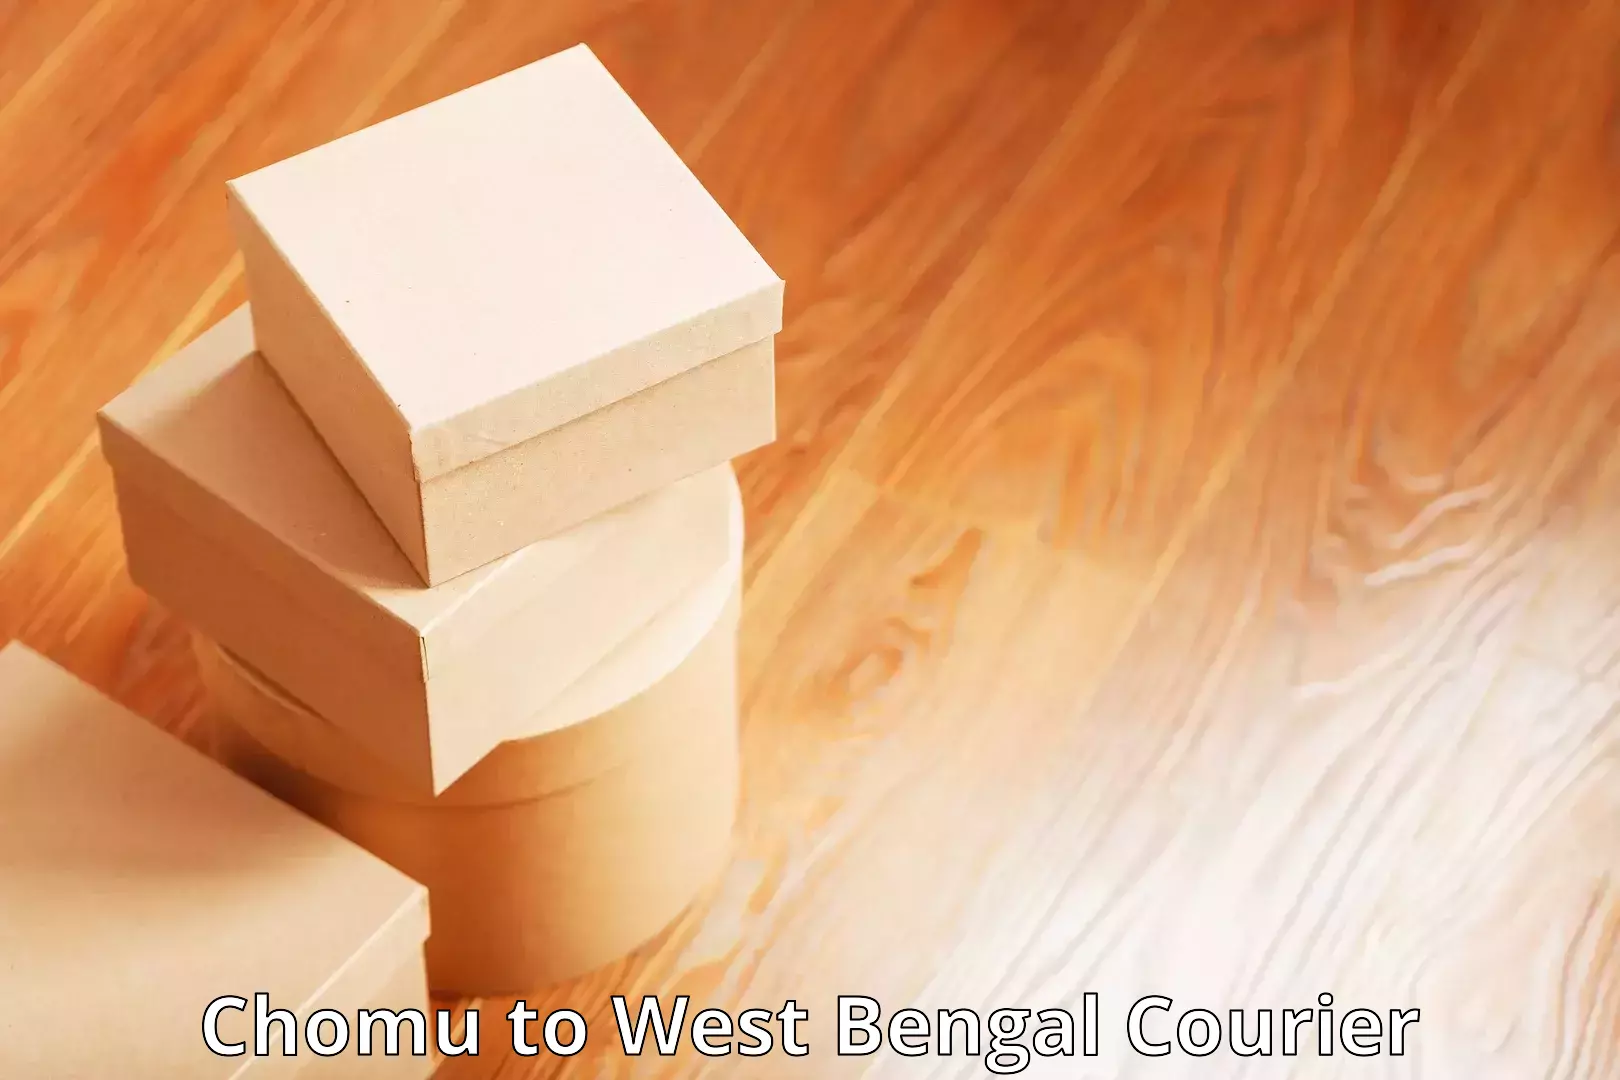 Advanced shipping network Chomu to West Bengal